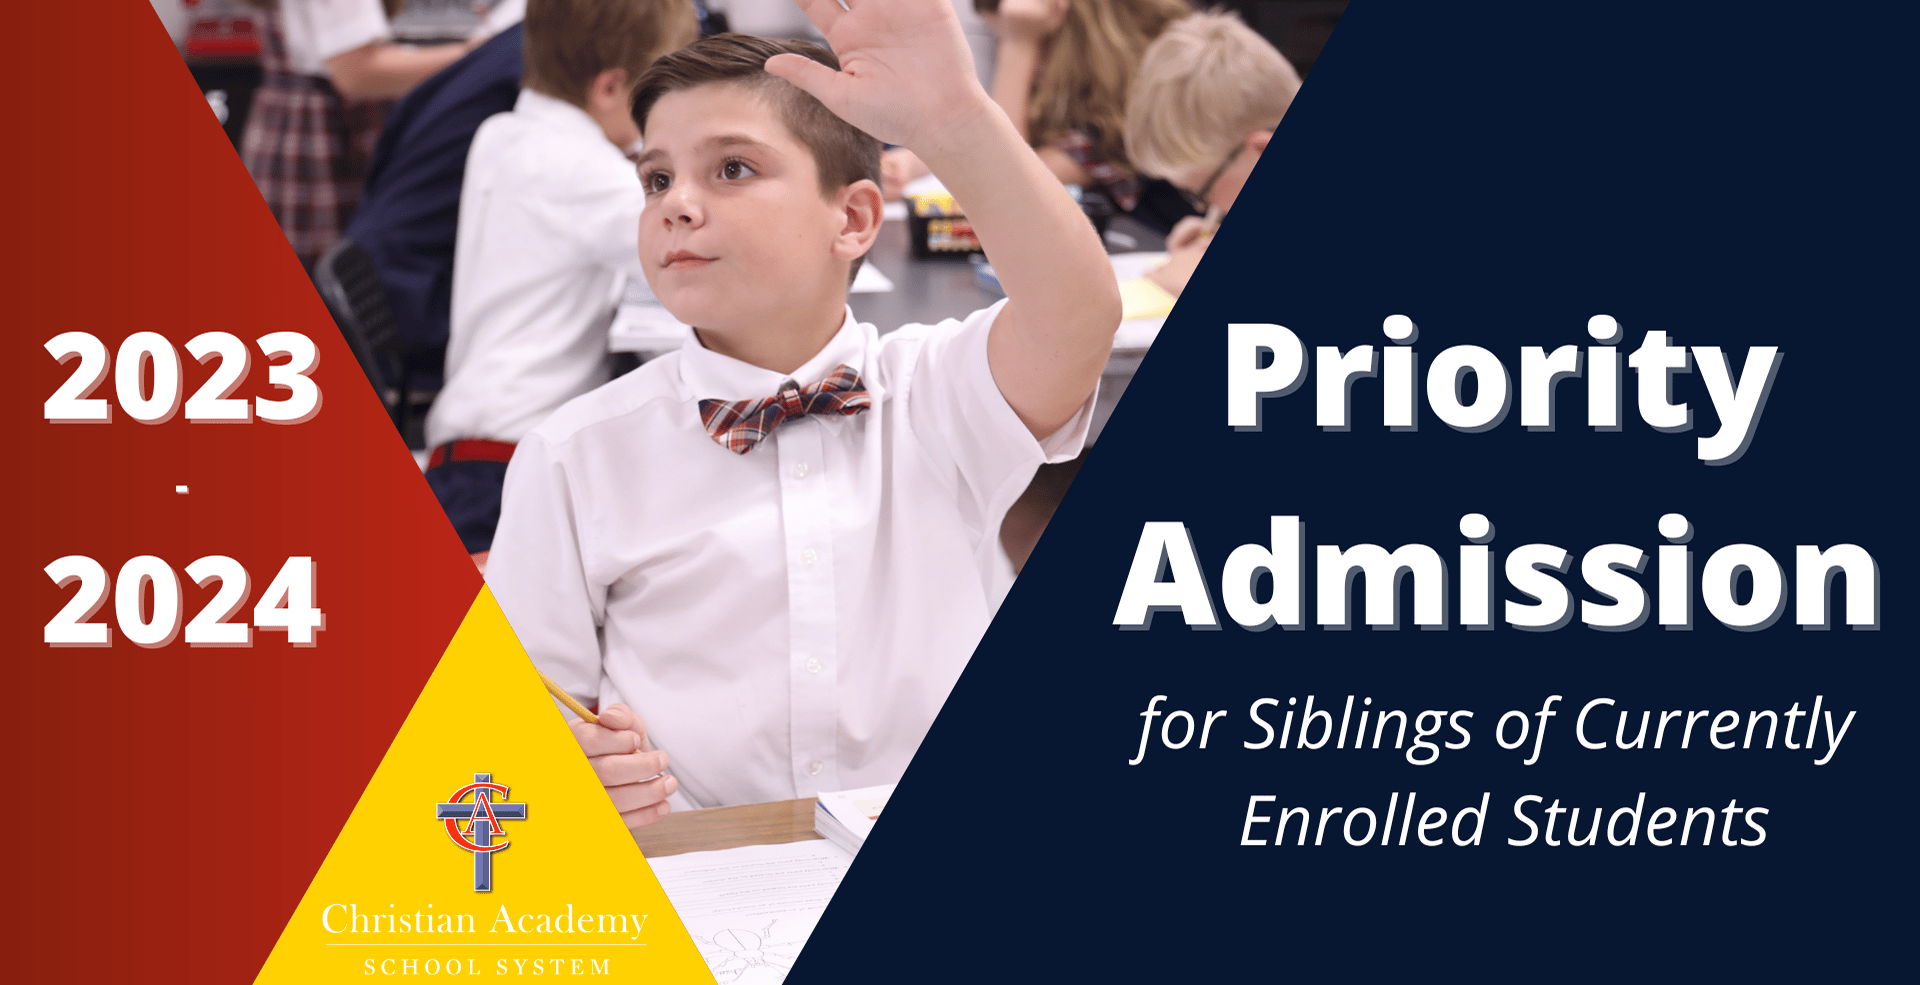 Christian Academy School System | Priority Admission for Siblings | 2023-2024 School Year